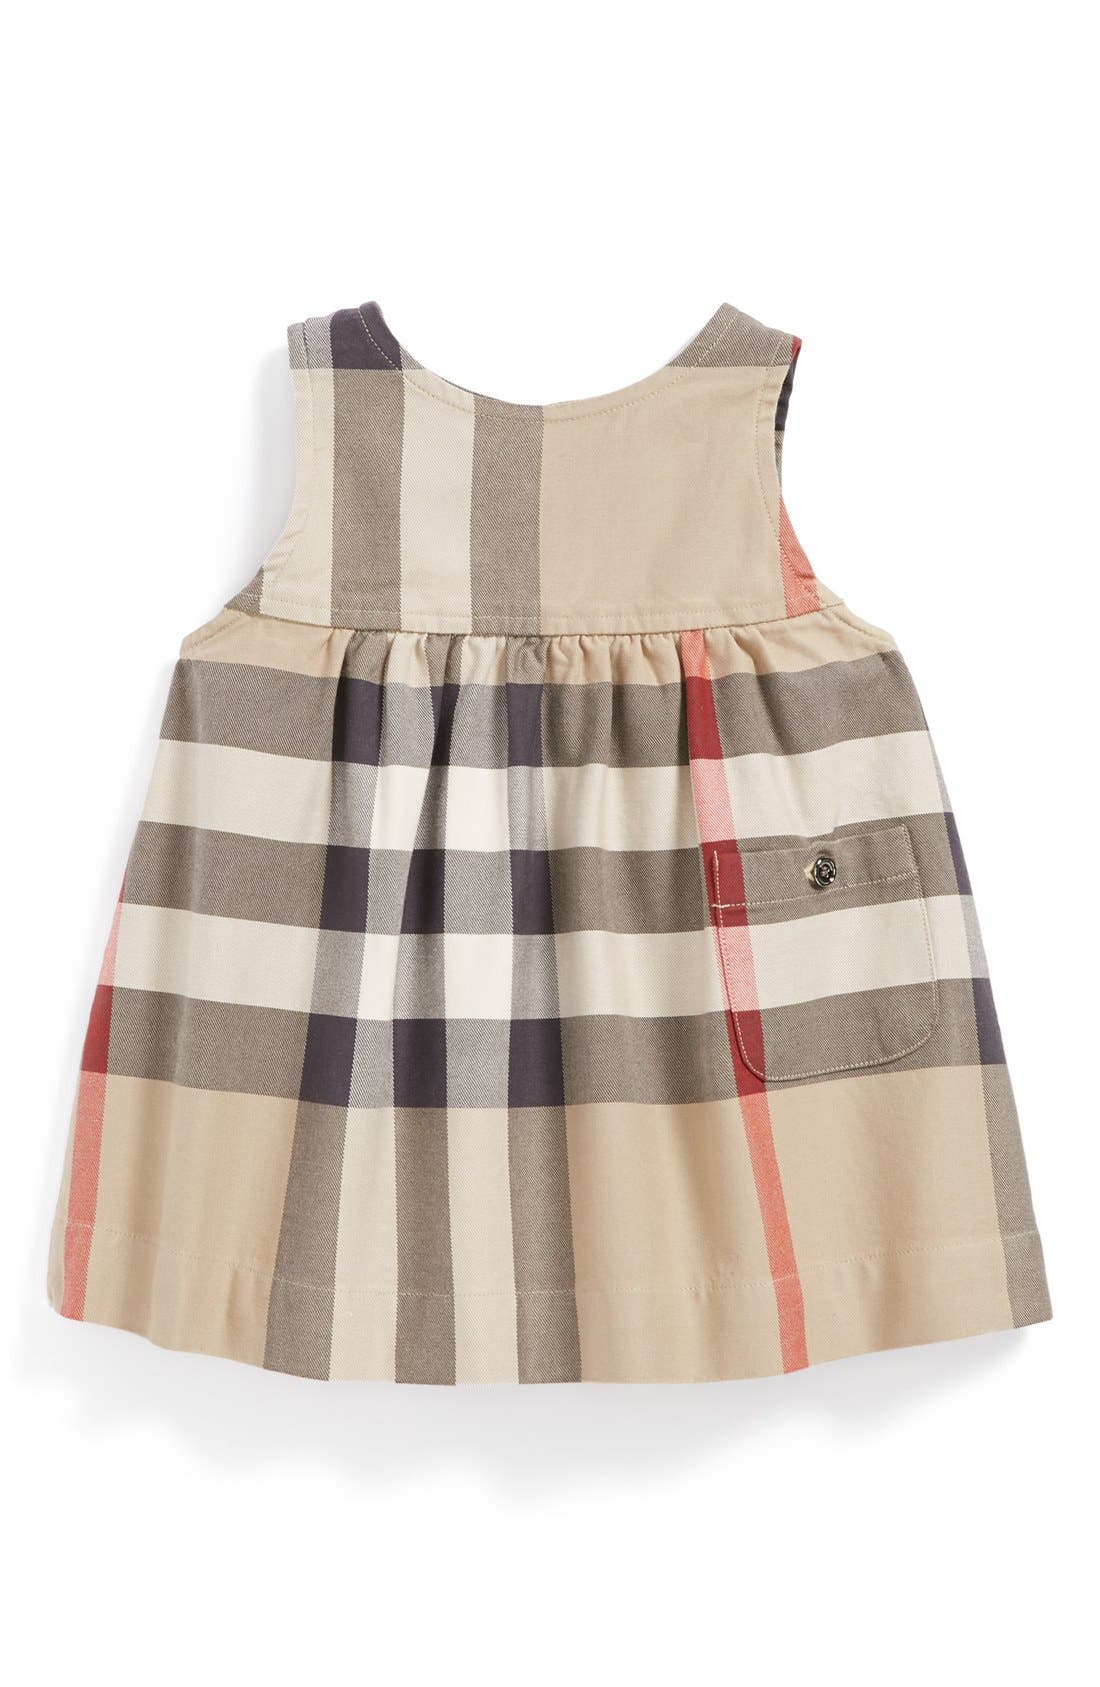 burberry outlet baby clothes